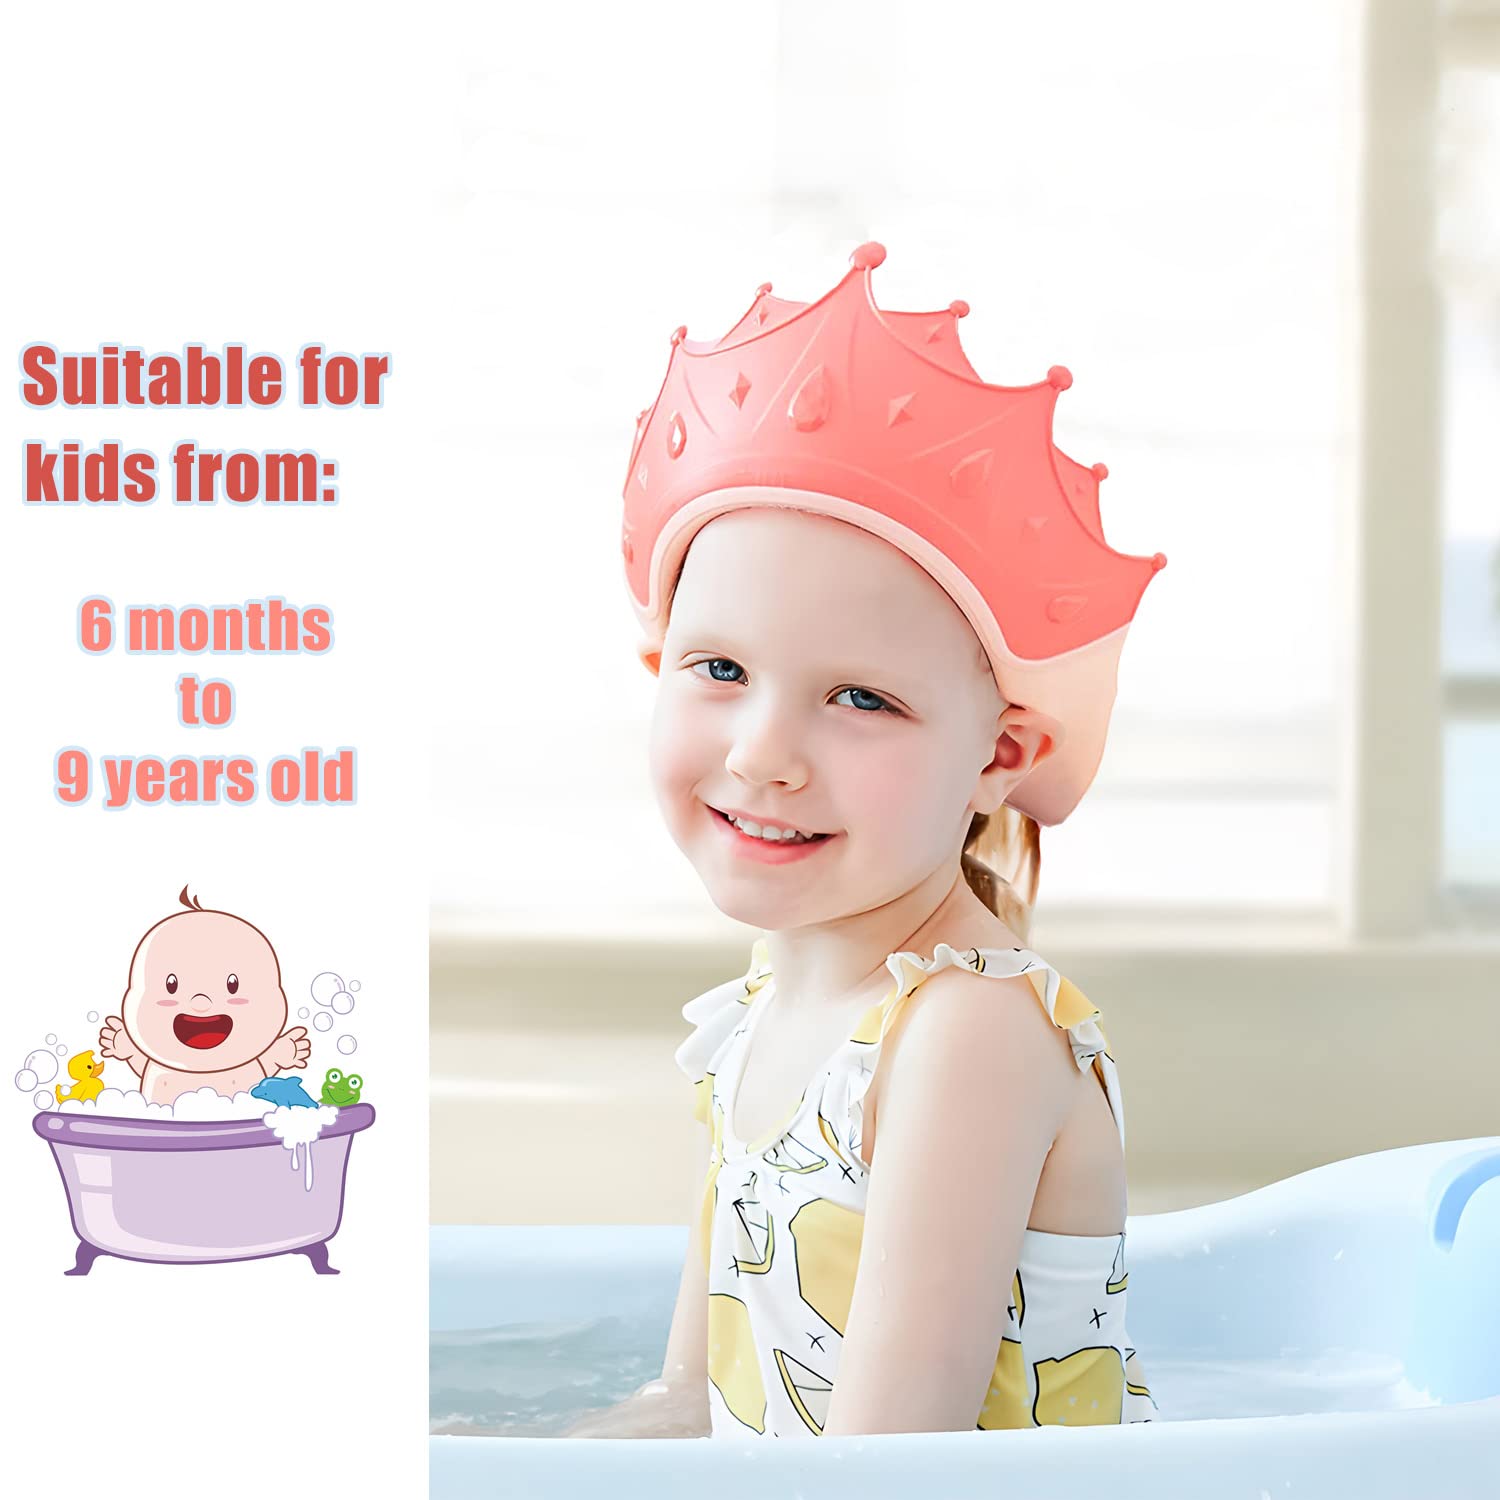 Baby Shower Cap Shield, Shower Cap for Kids, Visor Hat for Eye and Ear Protection for 0-9 Years Old Children, Baby Hair Washing Guard, Baby Bath Hat Cute Crown Shape Makes the Baby Bath More Fun